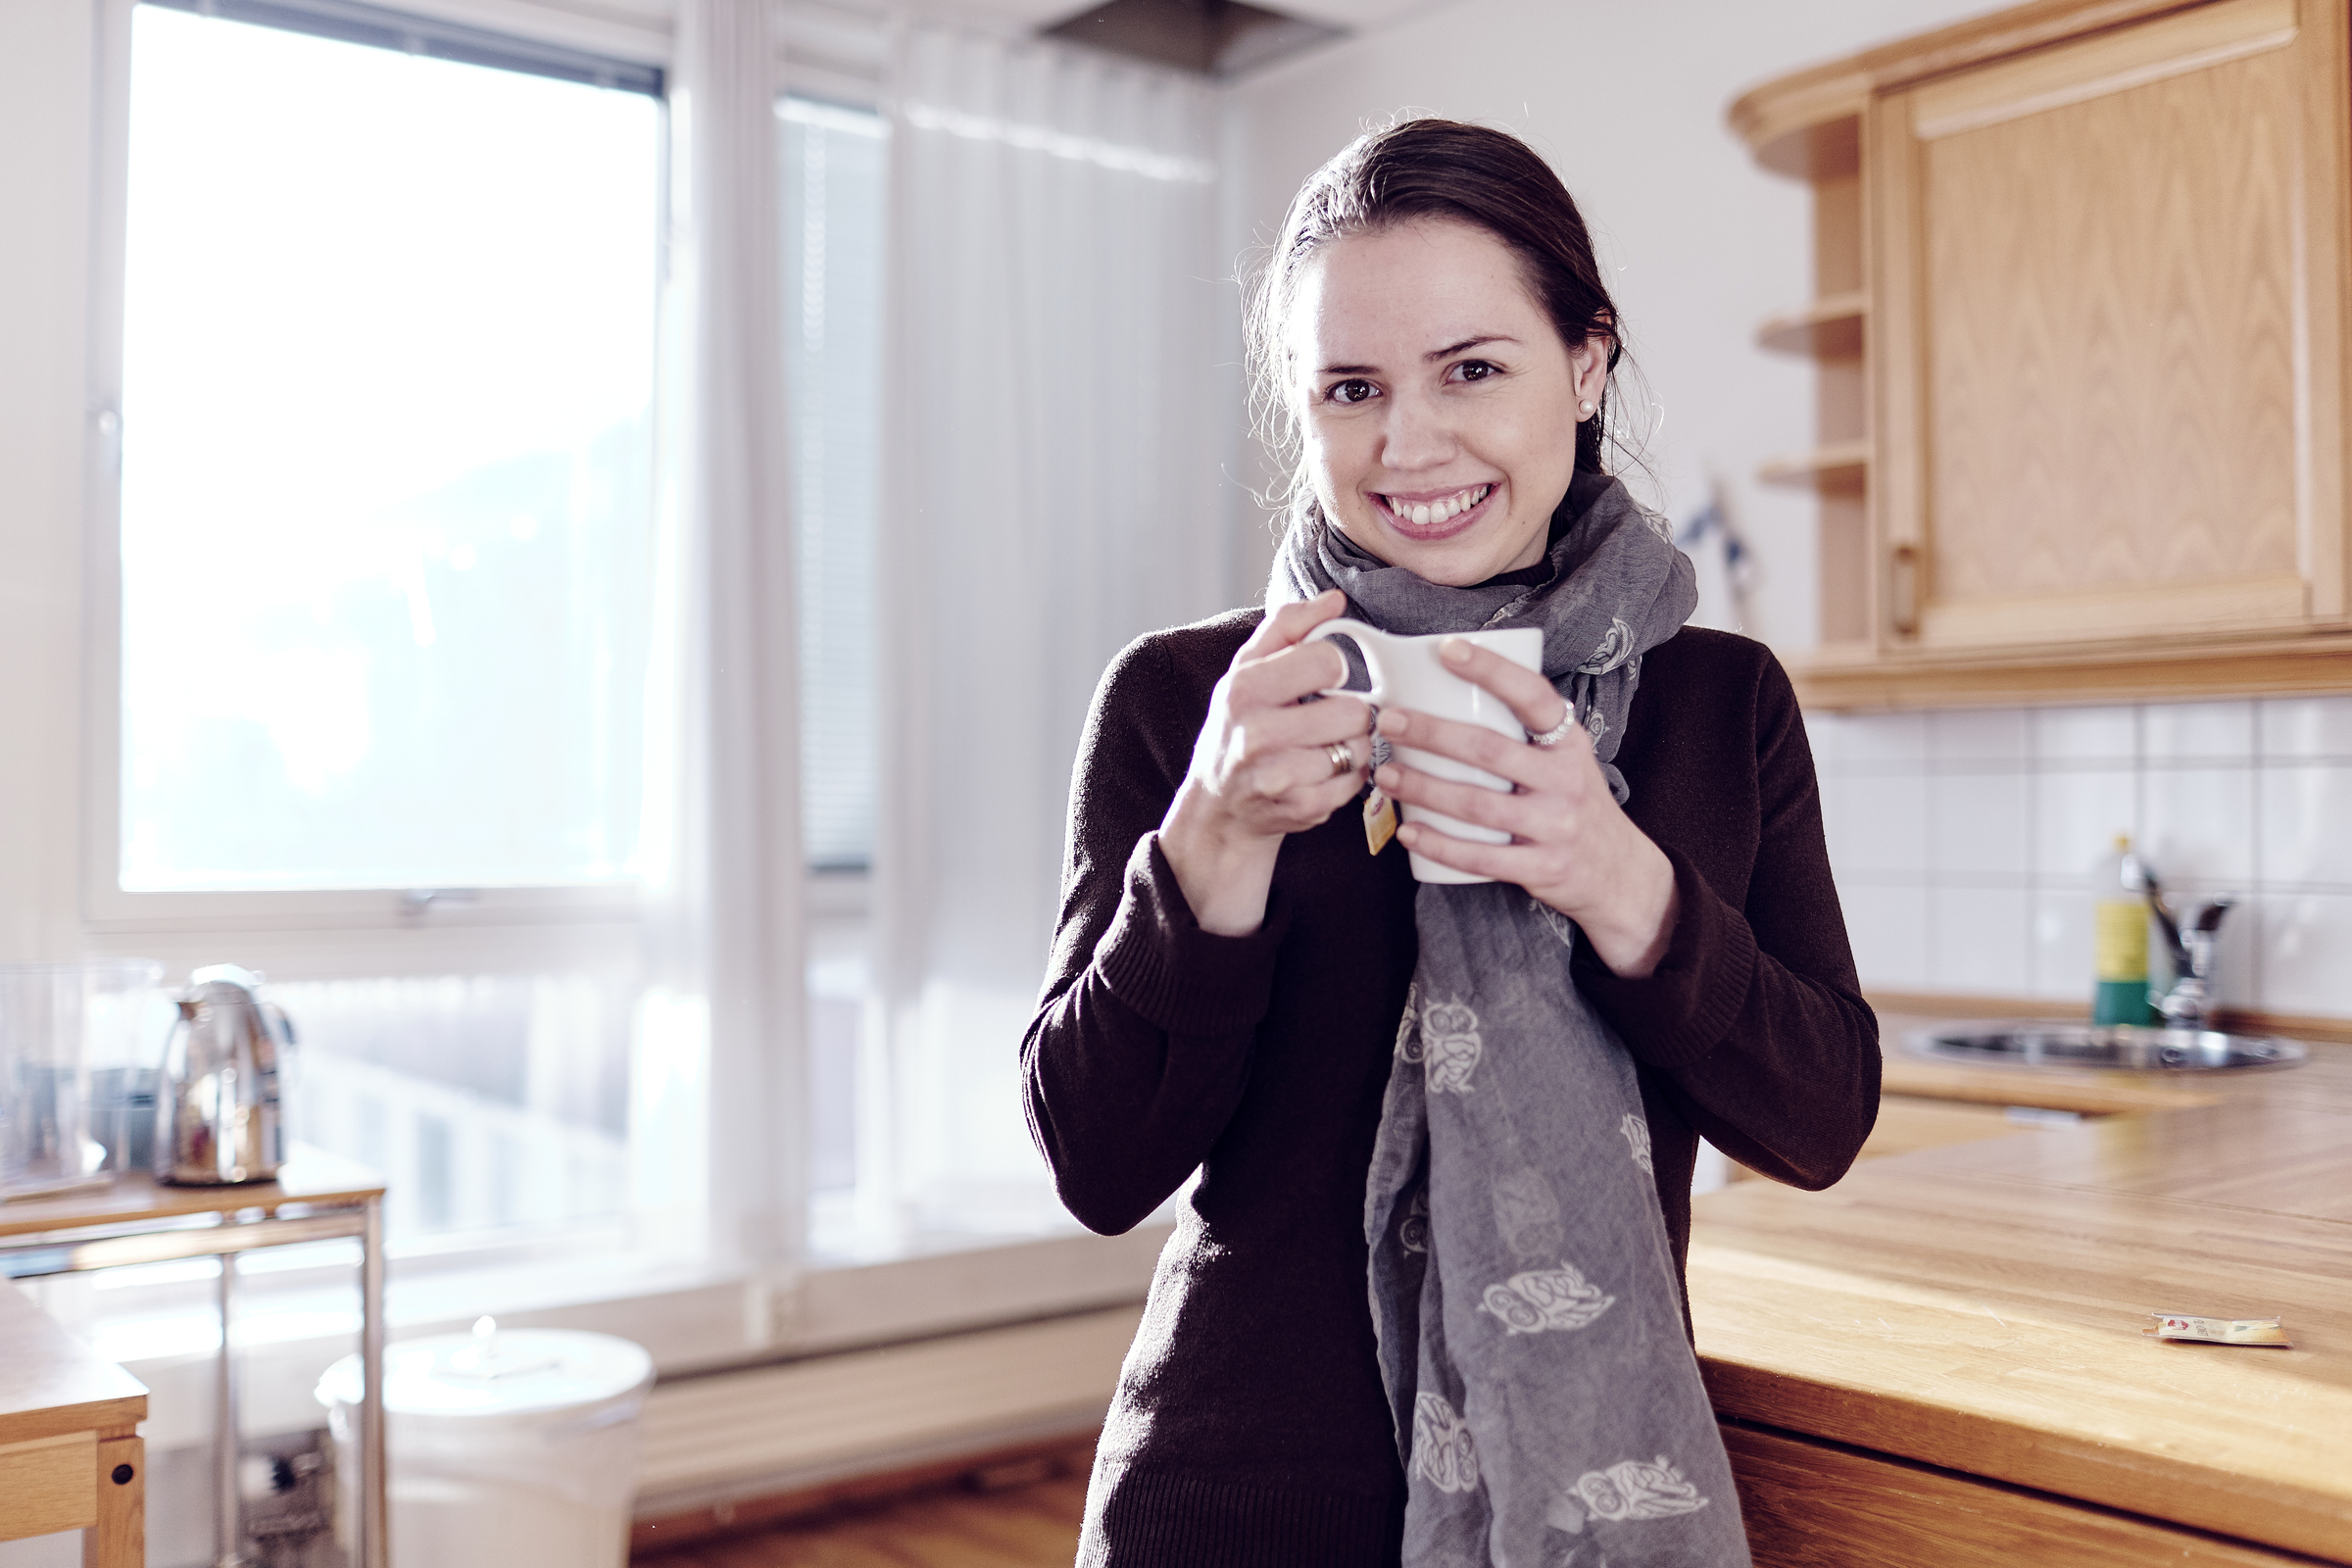 Smiling young woman holding a cup in the kitchen